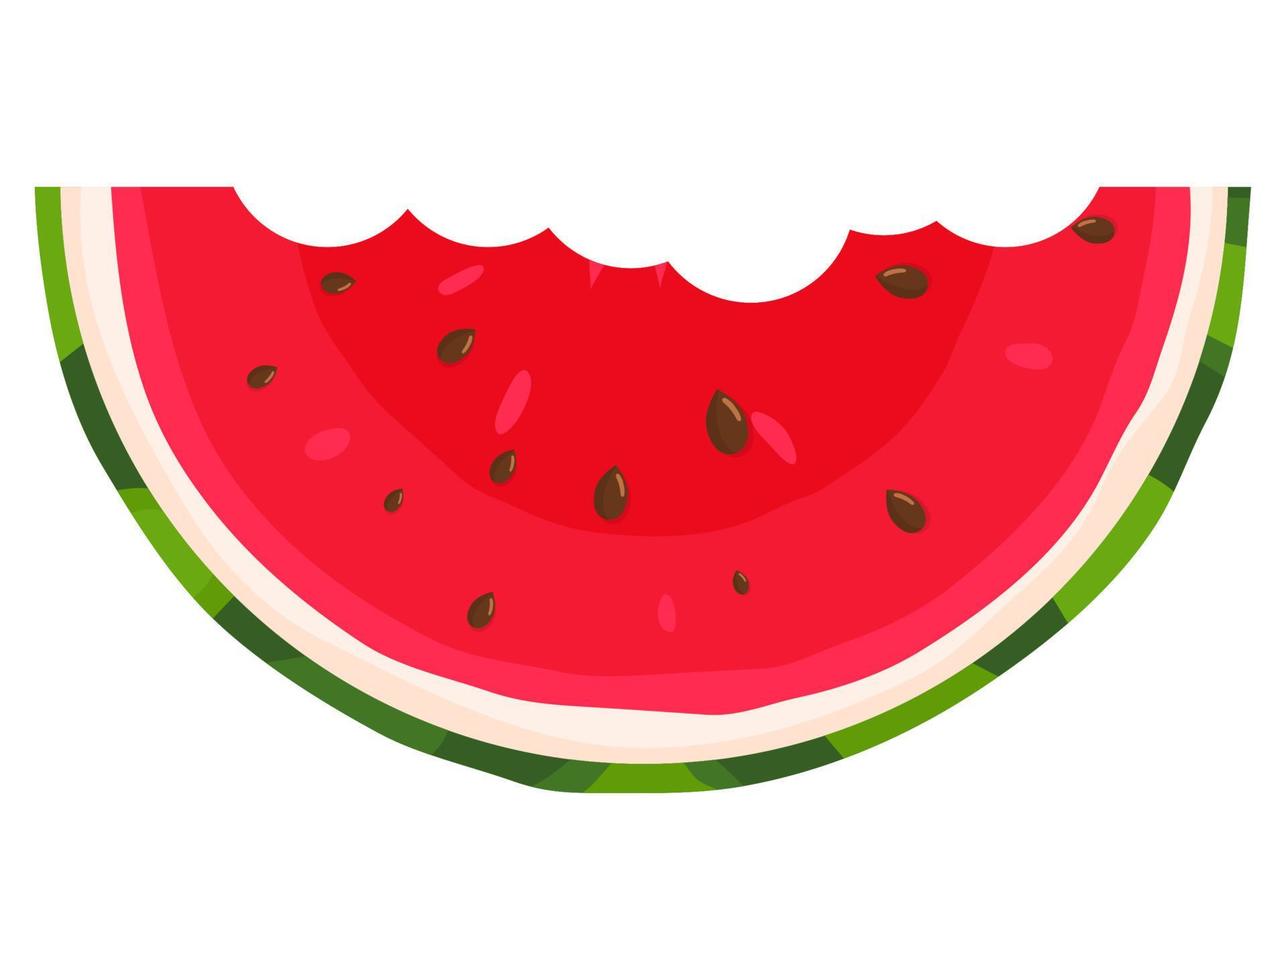 Fresh cut slice watermelon fruit isolated on white background. Summer fruits for healthy lifestyle. Organic fruit. Cartoon style. Vector illustration for any design.